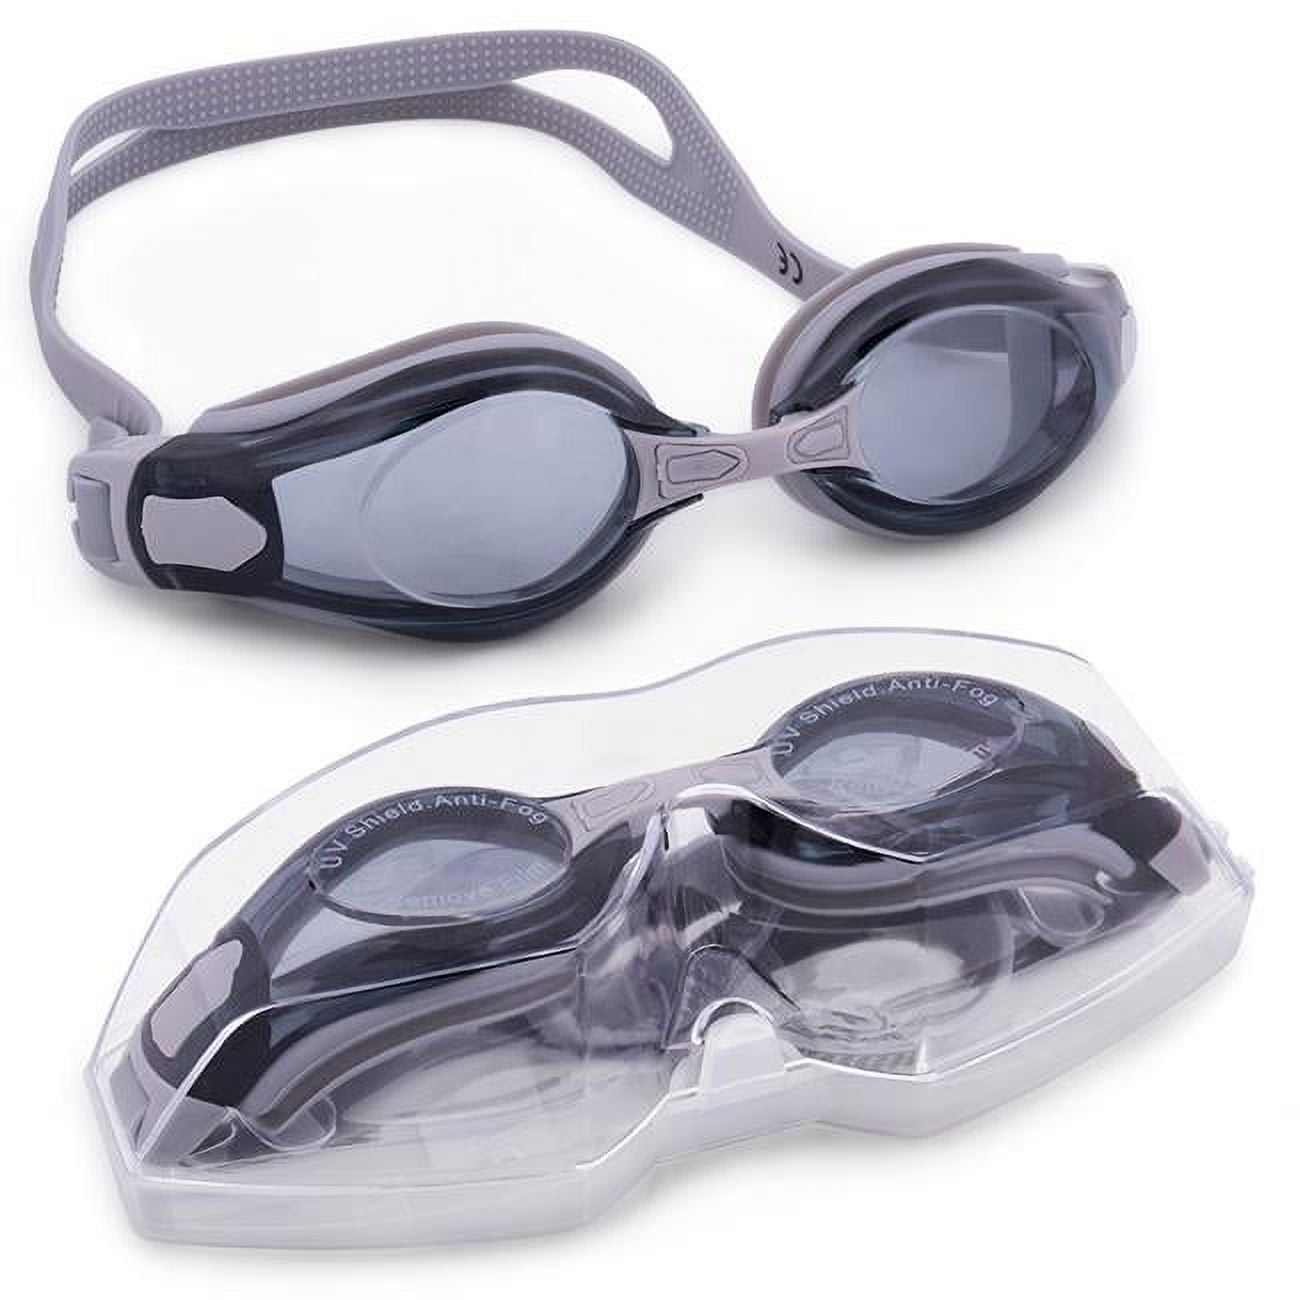 Picture of Brybelly SSWI-108 Clear Swimming Goggles with Case, Gray